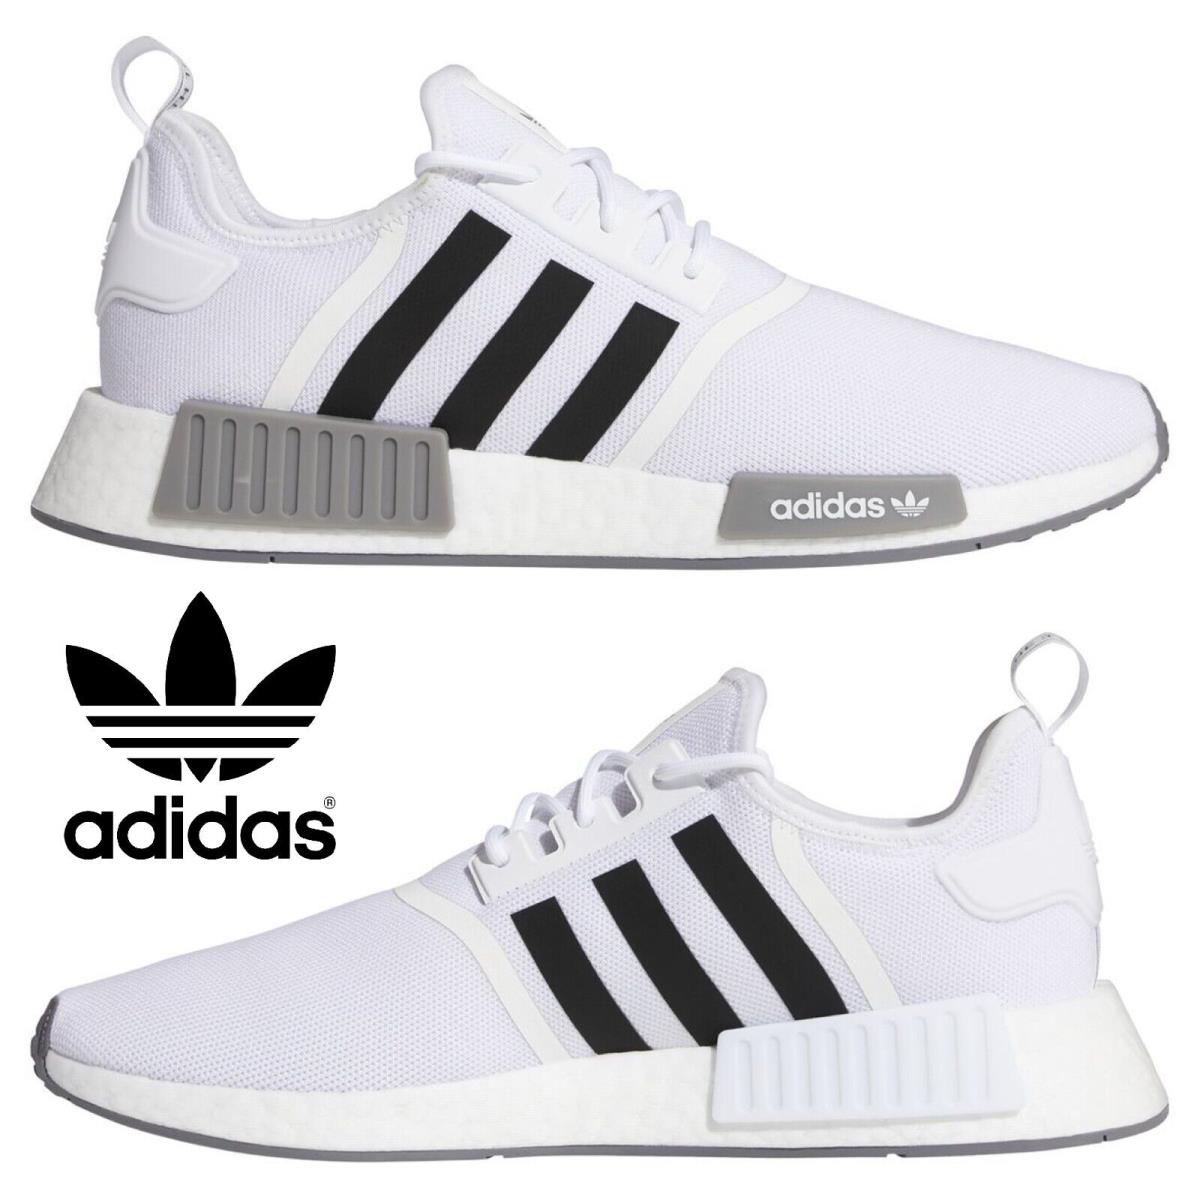 Adidas Originals Nmd R1 Men`s Sneakers Running Shoes Gym Casual Sport White